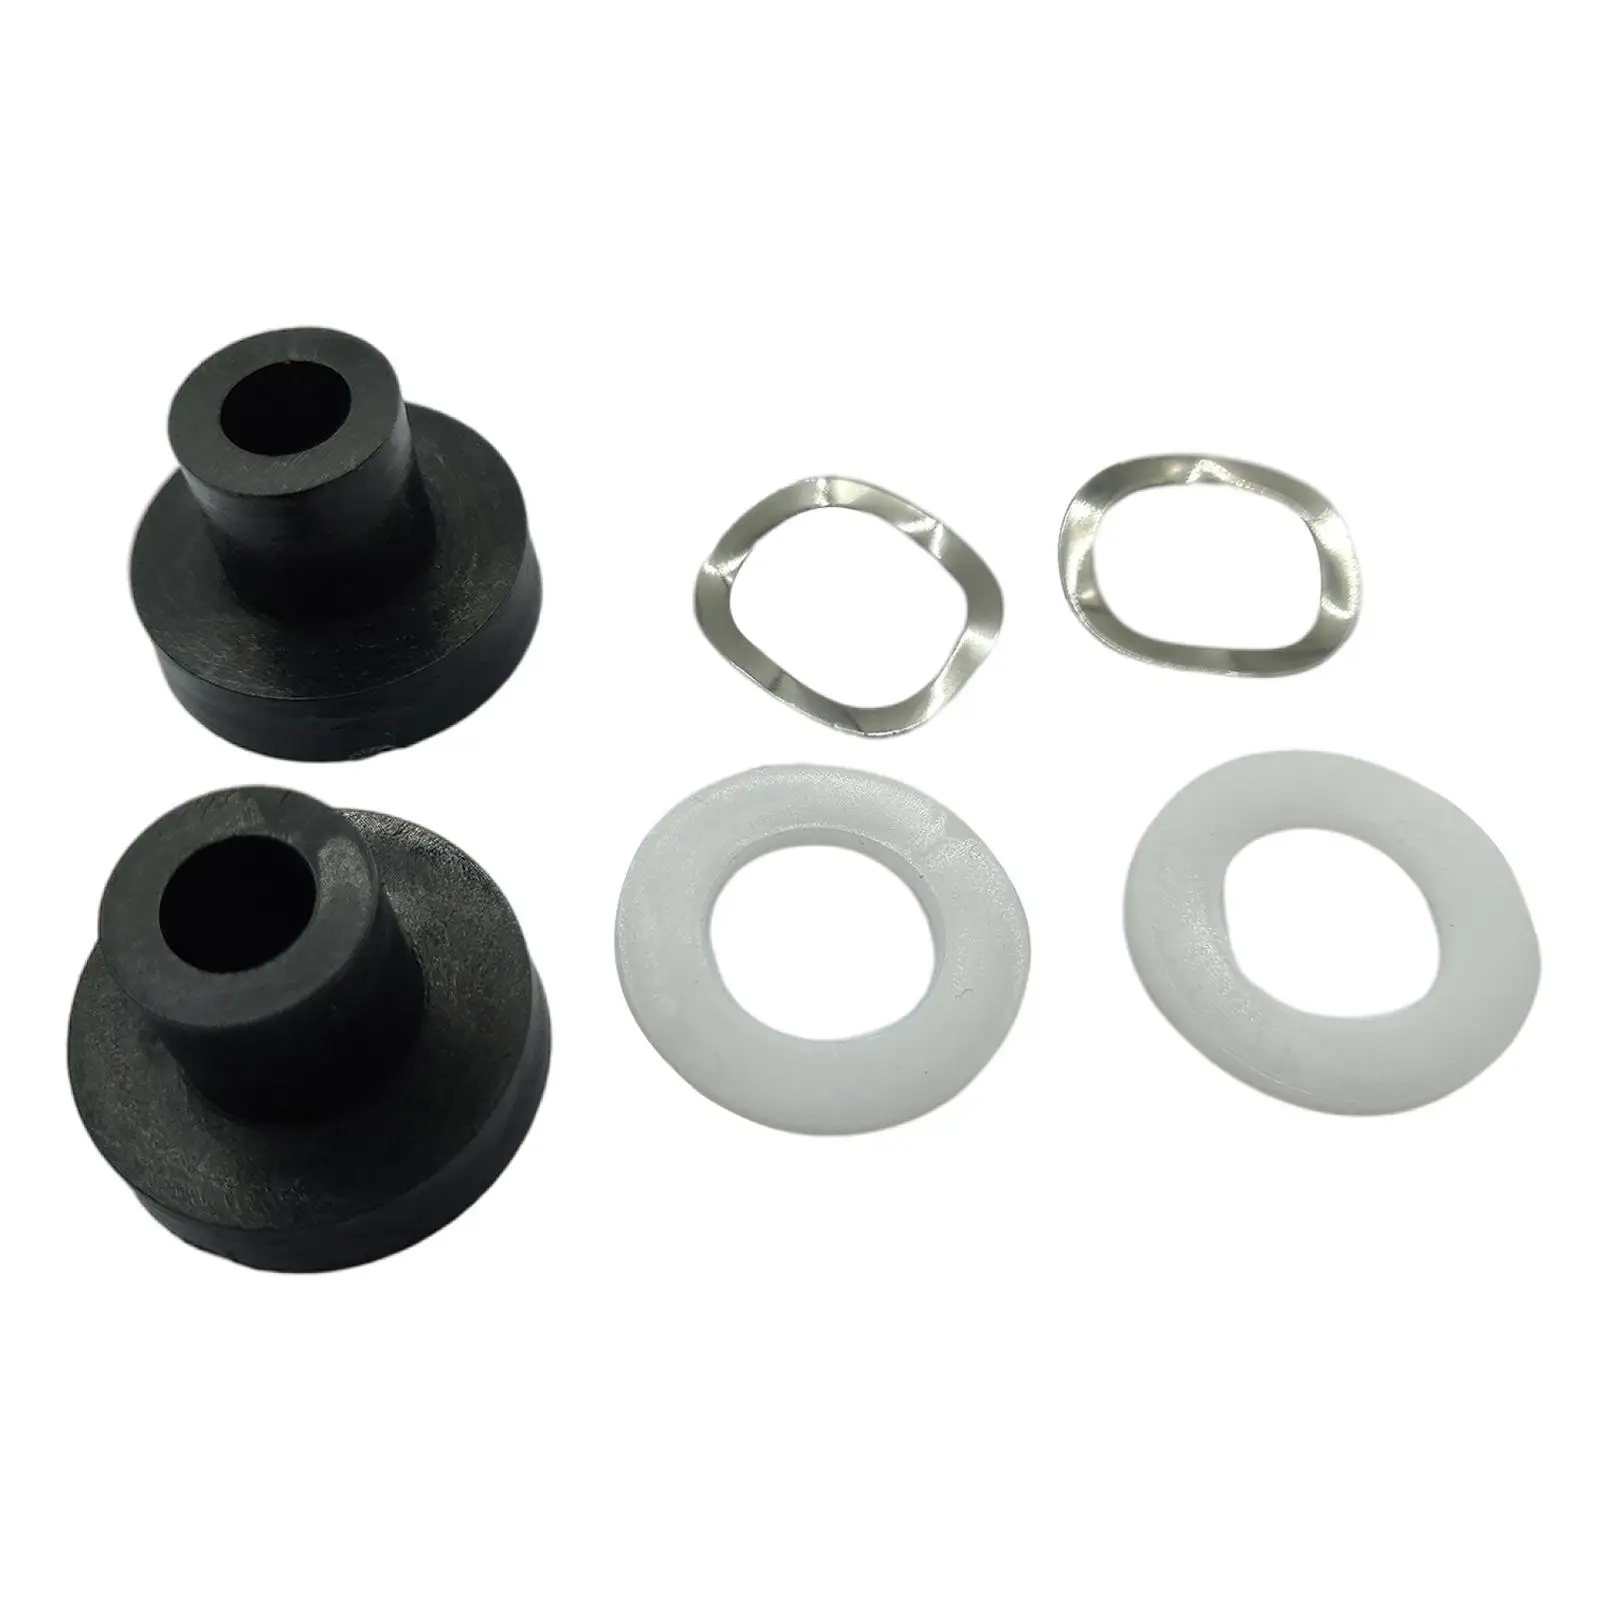 2 Pieces Car Window Bushings 909-925 Accessories Professional Replacement Easy to Install High Performance Fit for Mazda Miata